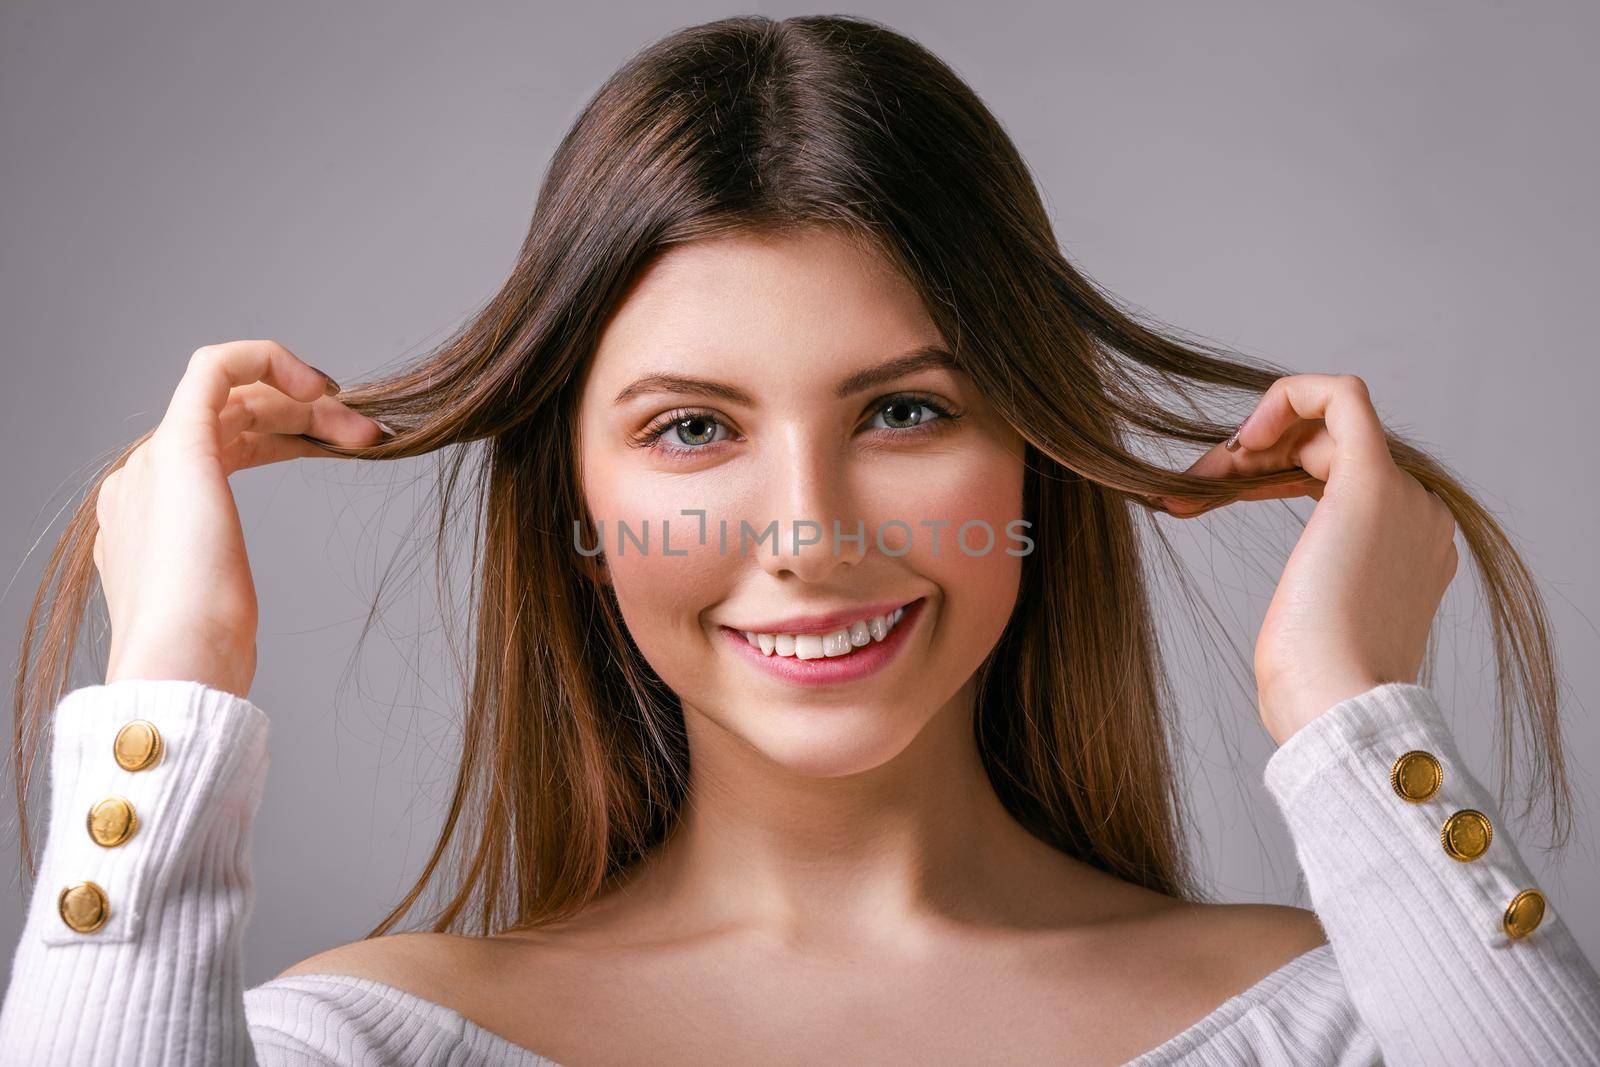 Delighted young girl with loose hair stands on a gray background looking happily at the camera